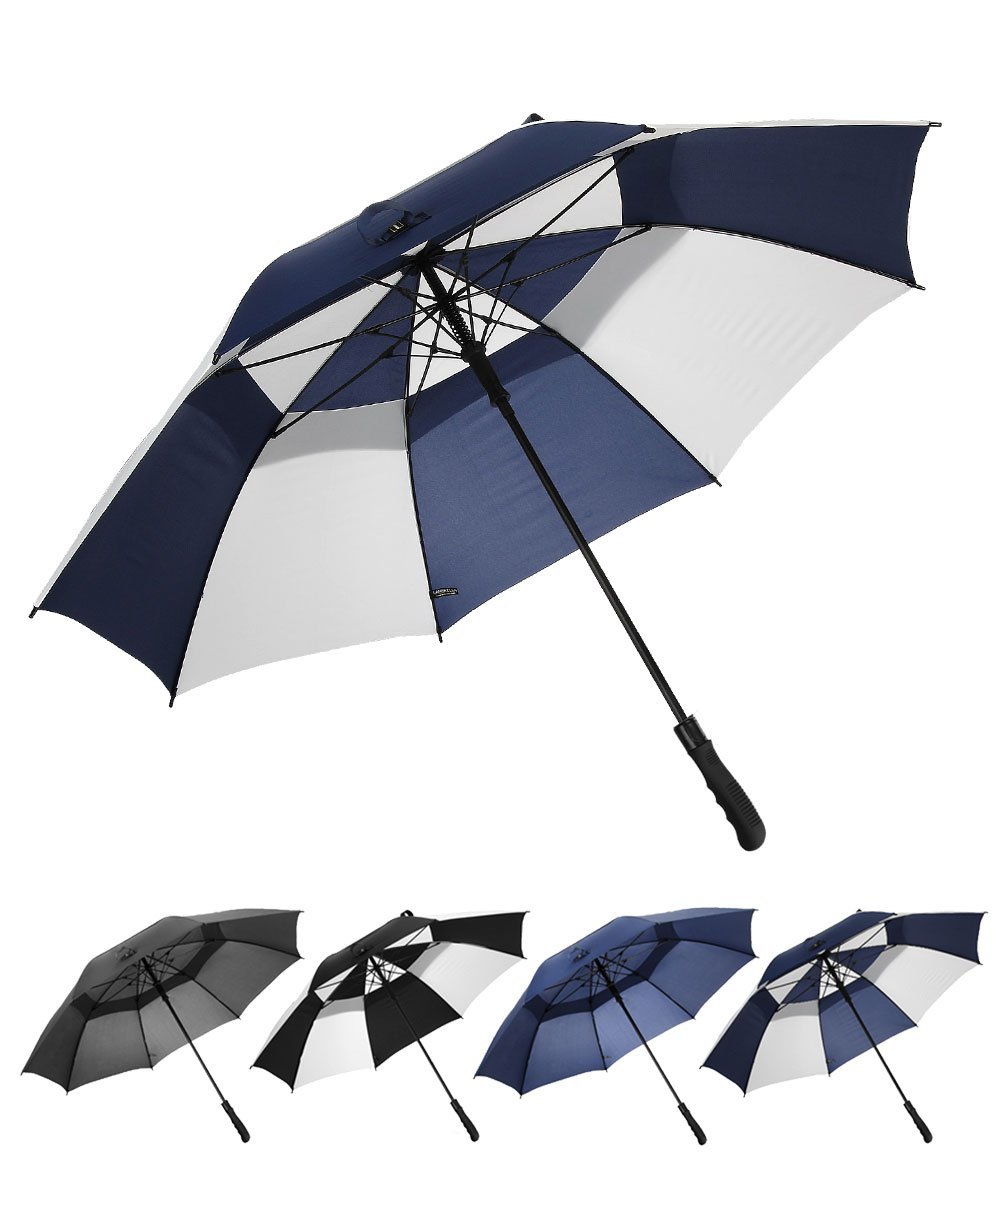 Golf Umbrella Windproof Large 68 Inch Stick Umbrella Double Canopy Vented Auto Open for Men and Women - Blue/White